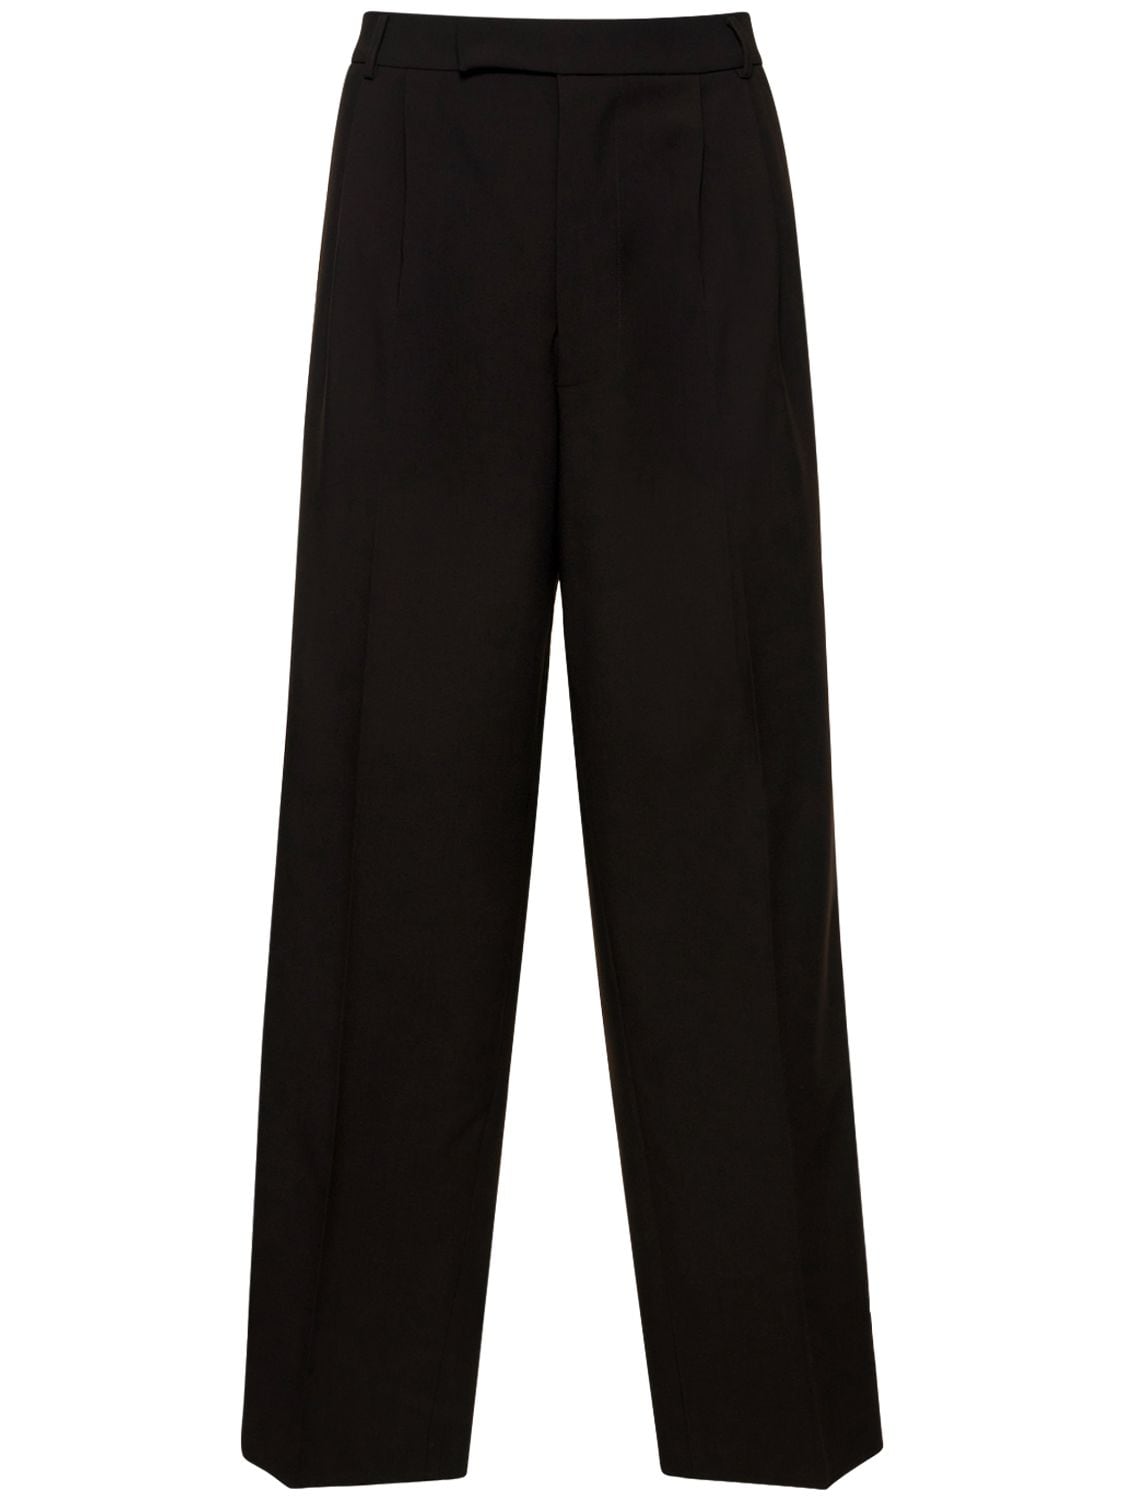 THE FRANKIE SHOP BEO MIDWEIGHT LIGHT STRETCH SUIT PANTS